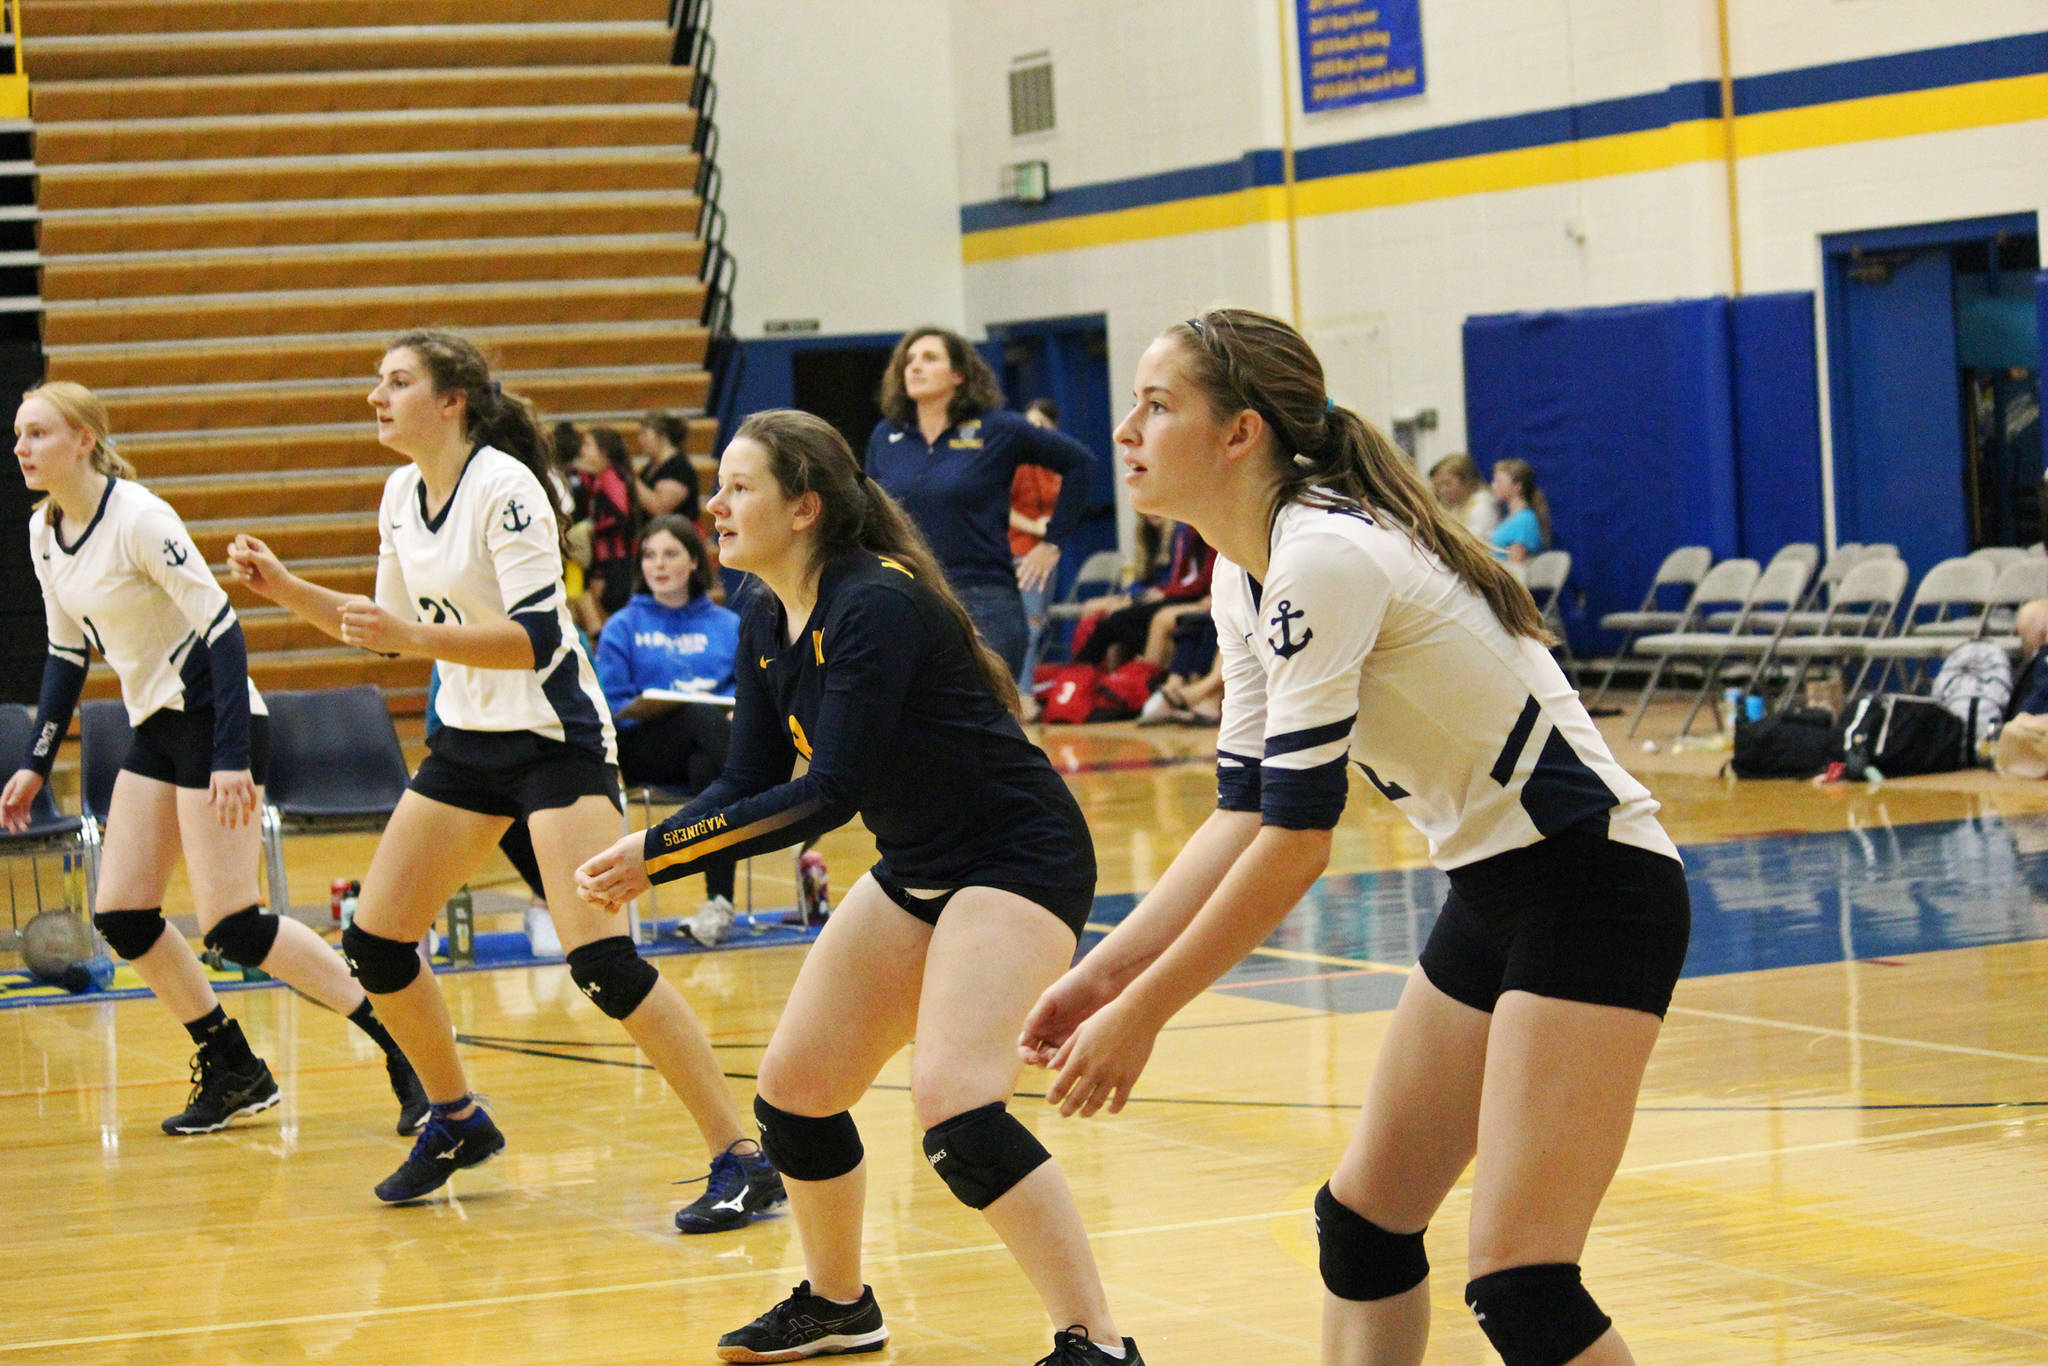 The back row of Homer volleyball players prepare to receive a serve from the Nikiski Bulldogs during a game at the Homer Jamboree tournament on Saturday, Aug. 24, 2019 in the Alice Witt Gymnasium in Homer, Alaska. (Photo by Megan Pacer/Homer News)